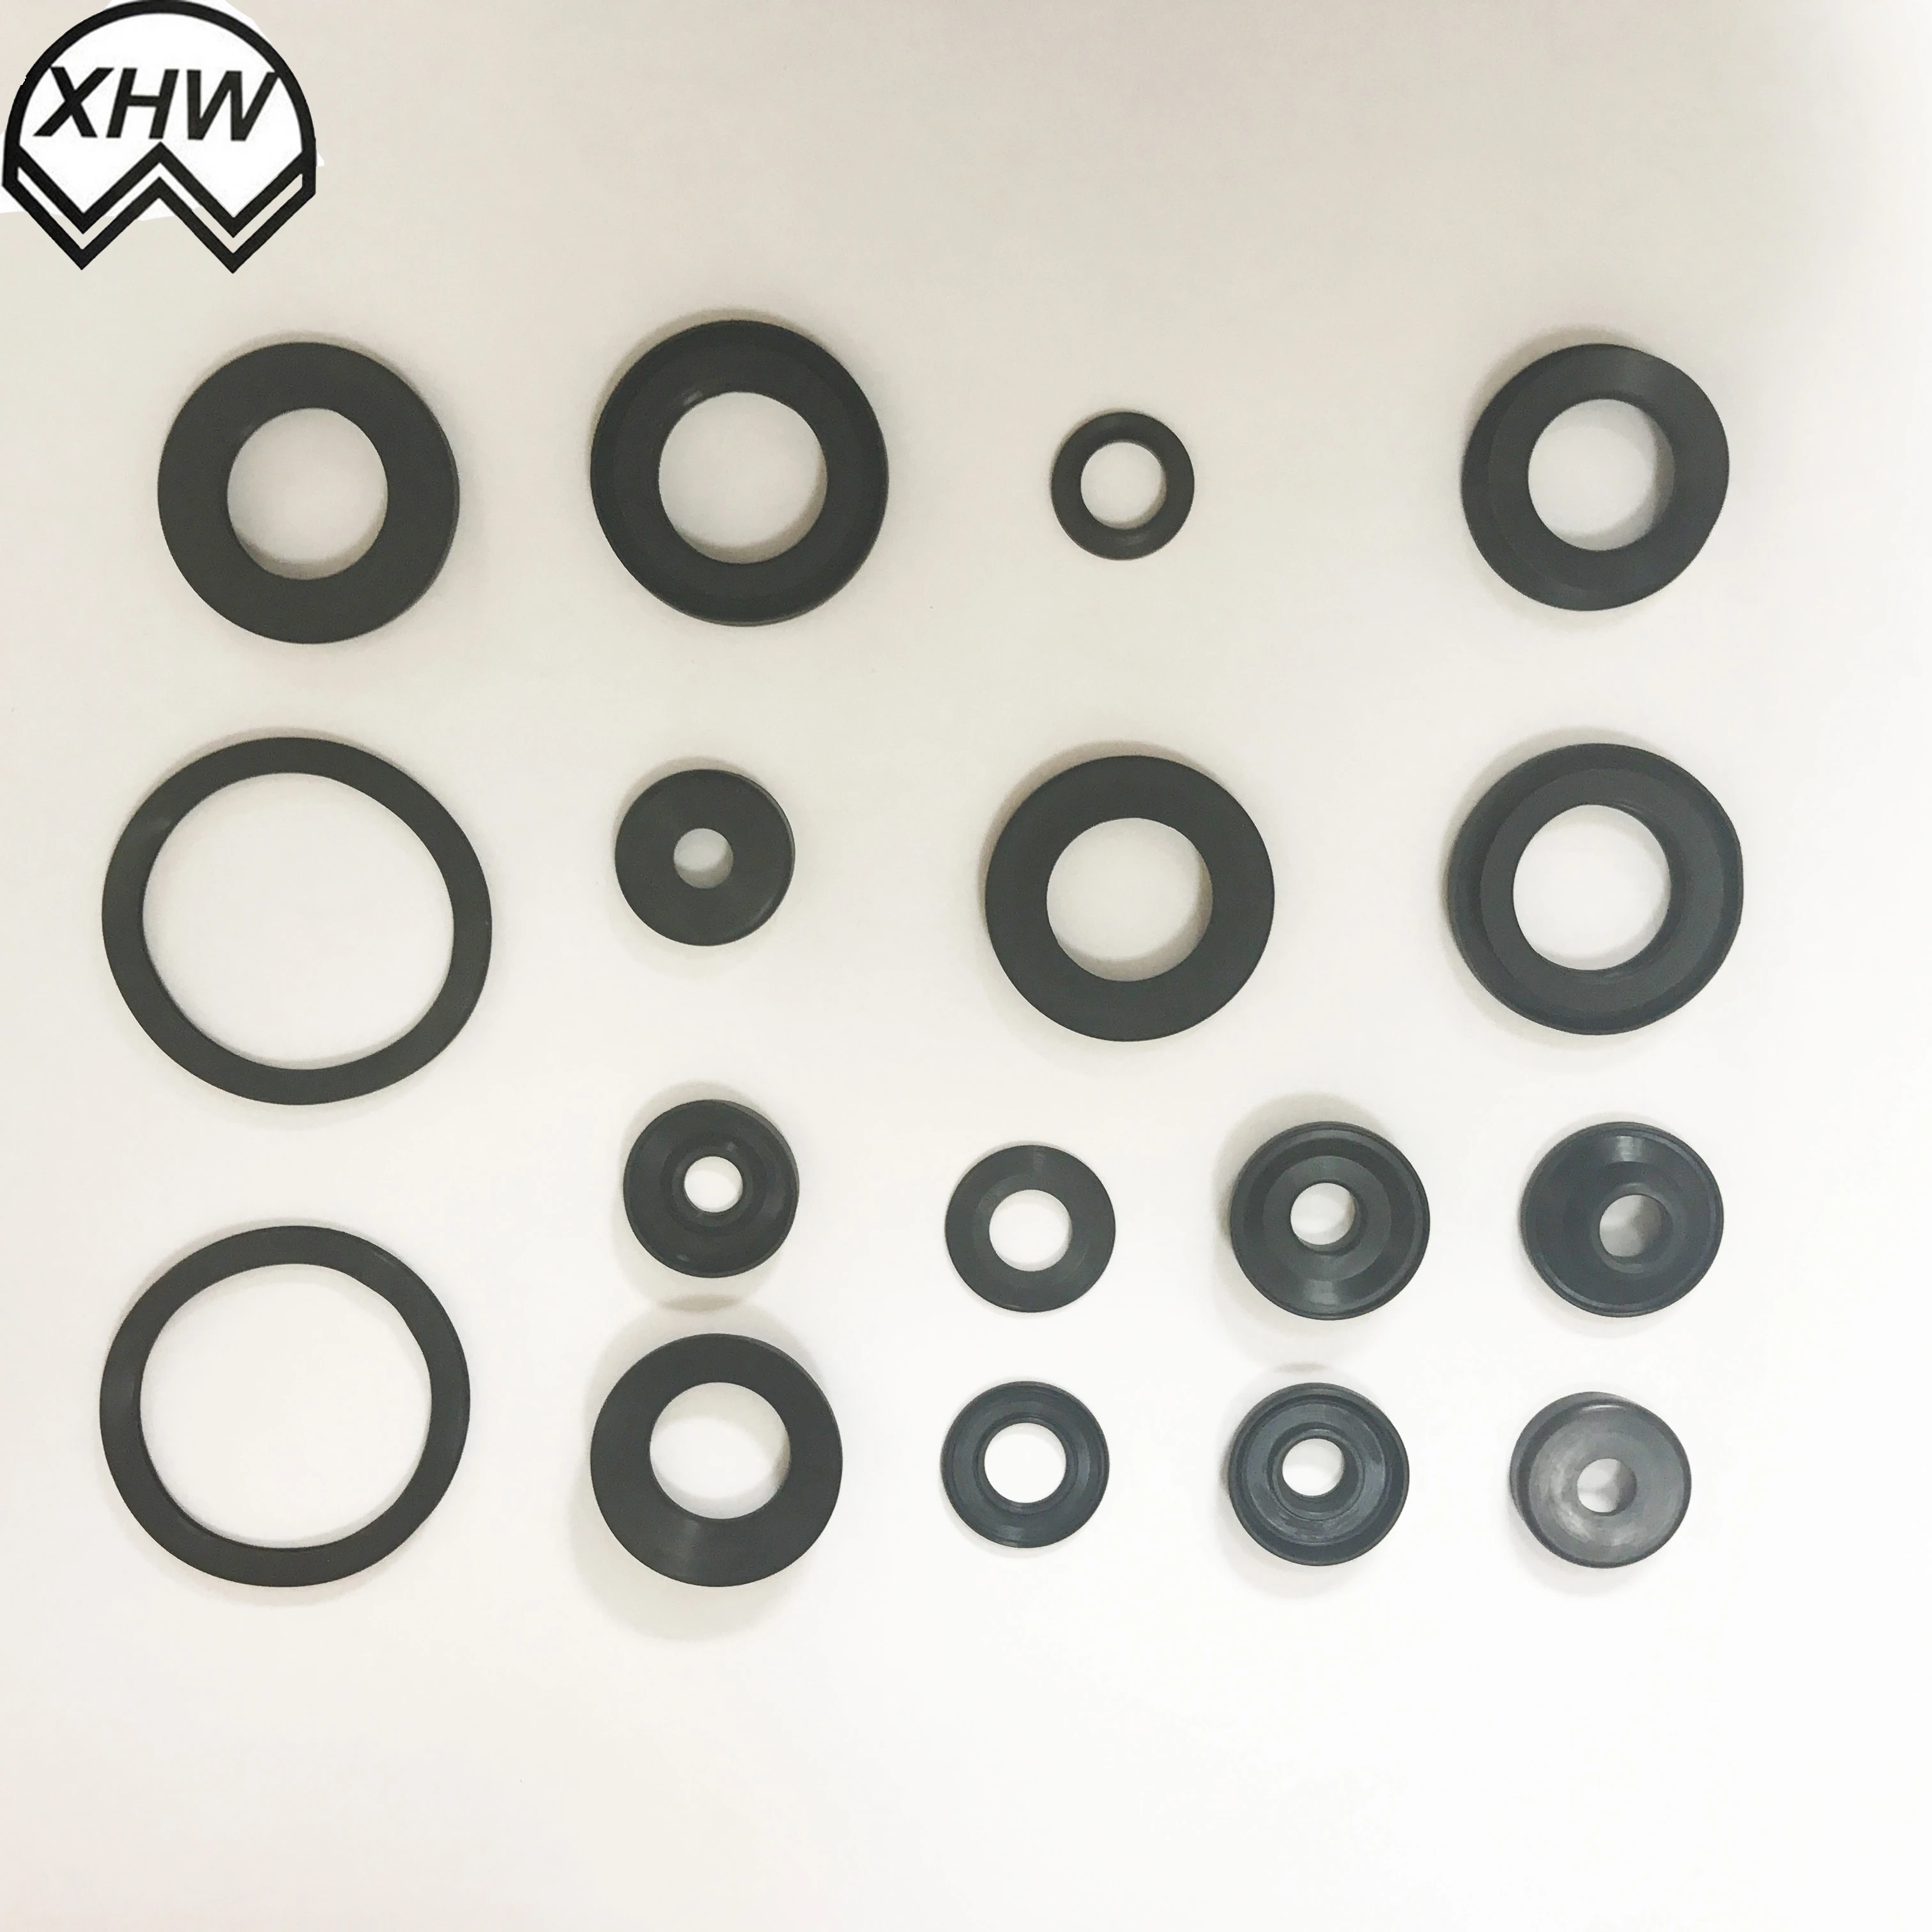 Top selling Rubber Gasket  rubber silicone gasket seals  factory customized molds